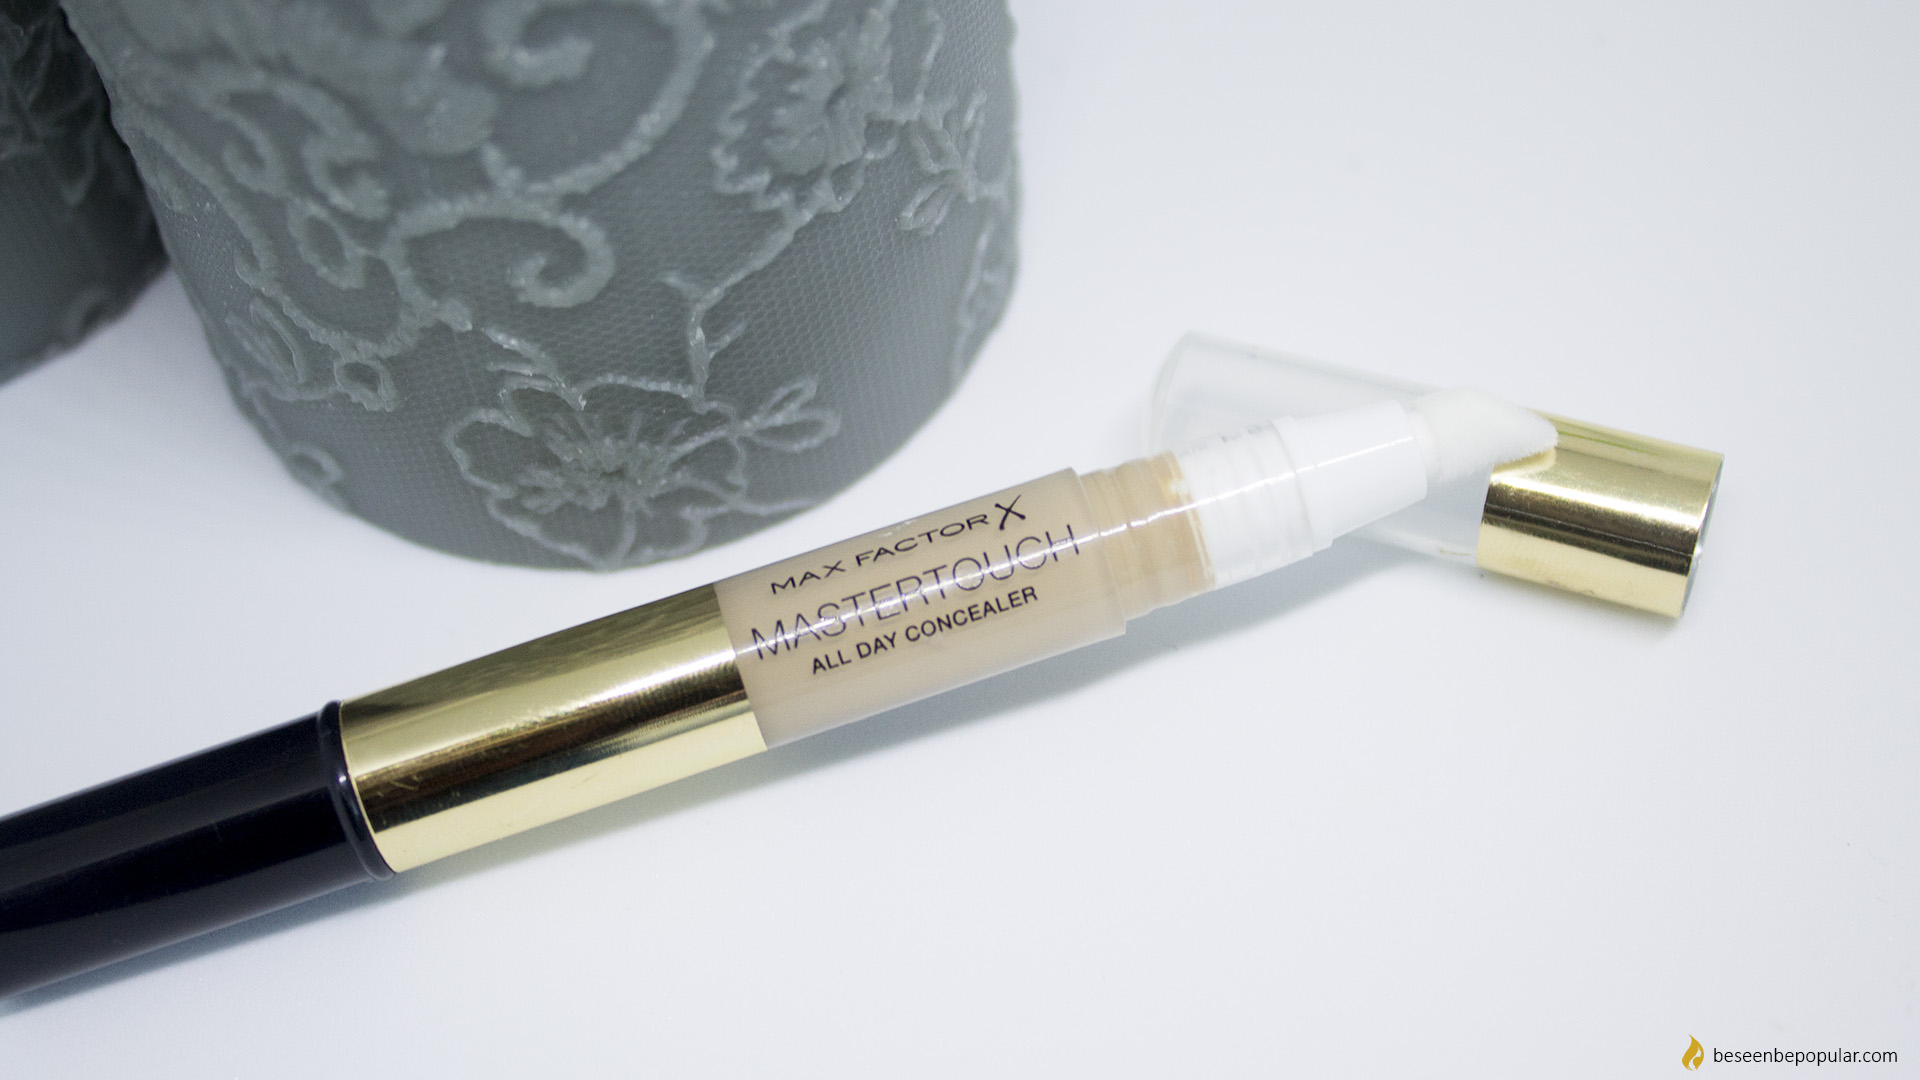 MAX FACTOR Mastertouch All day concealer